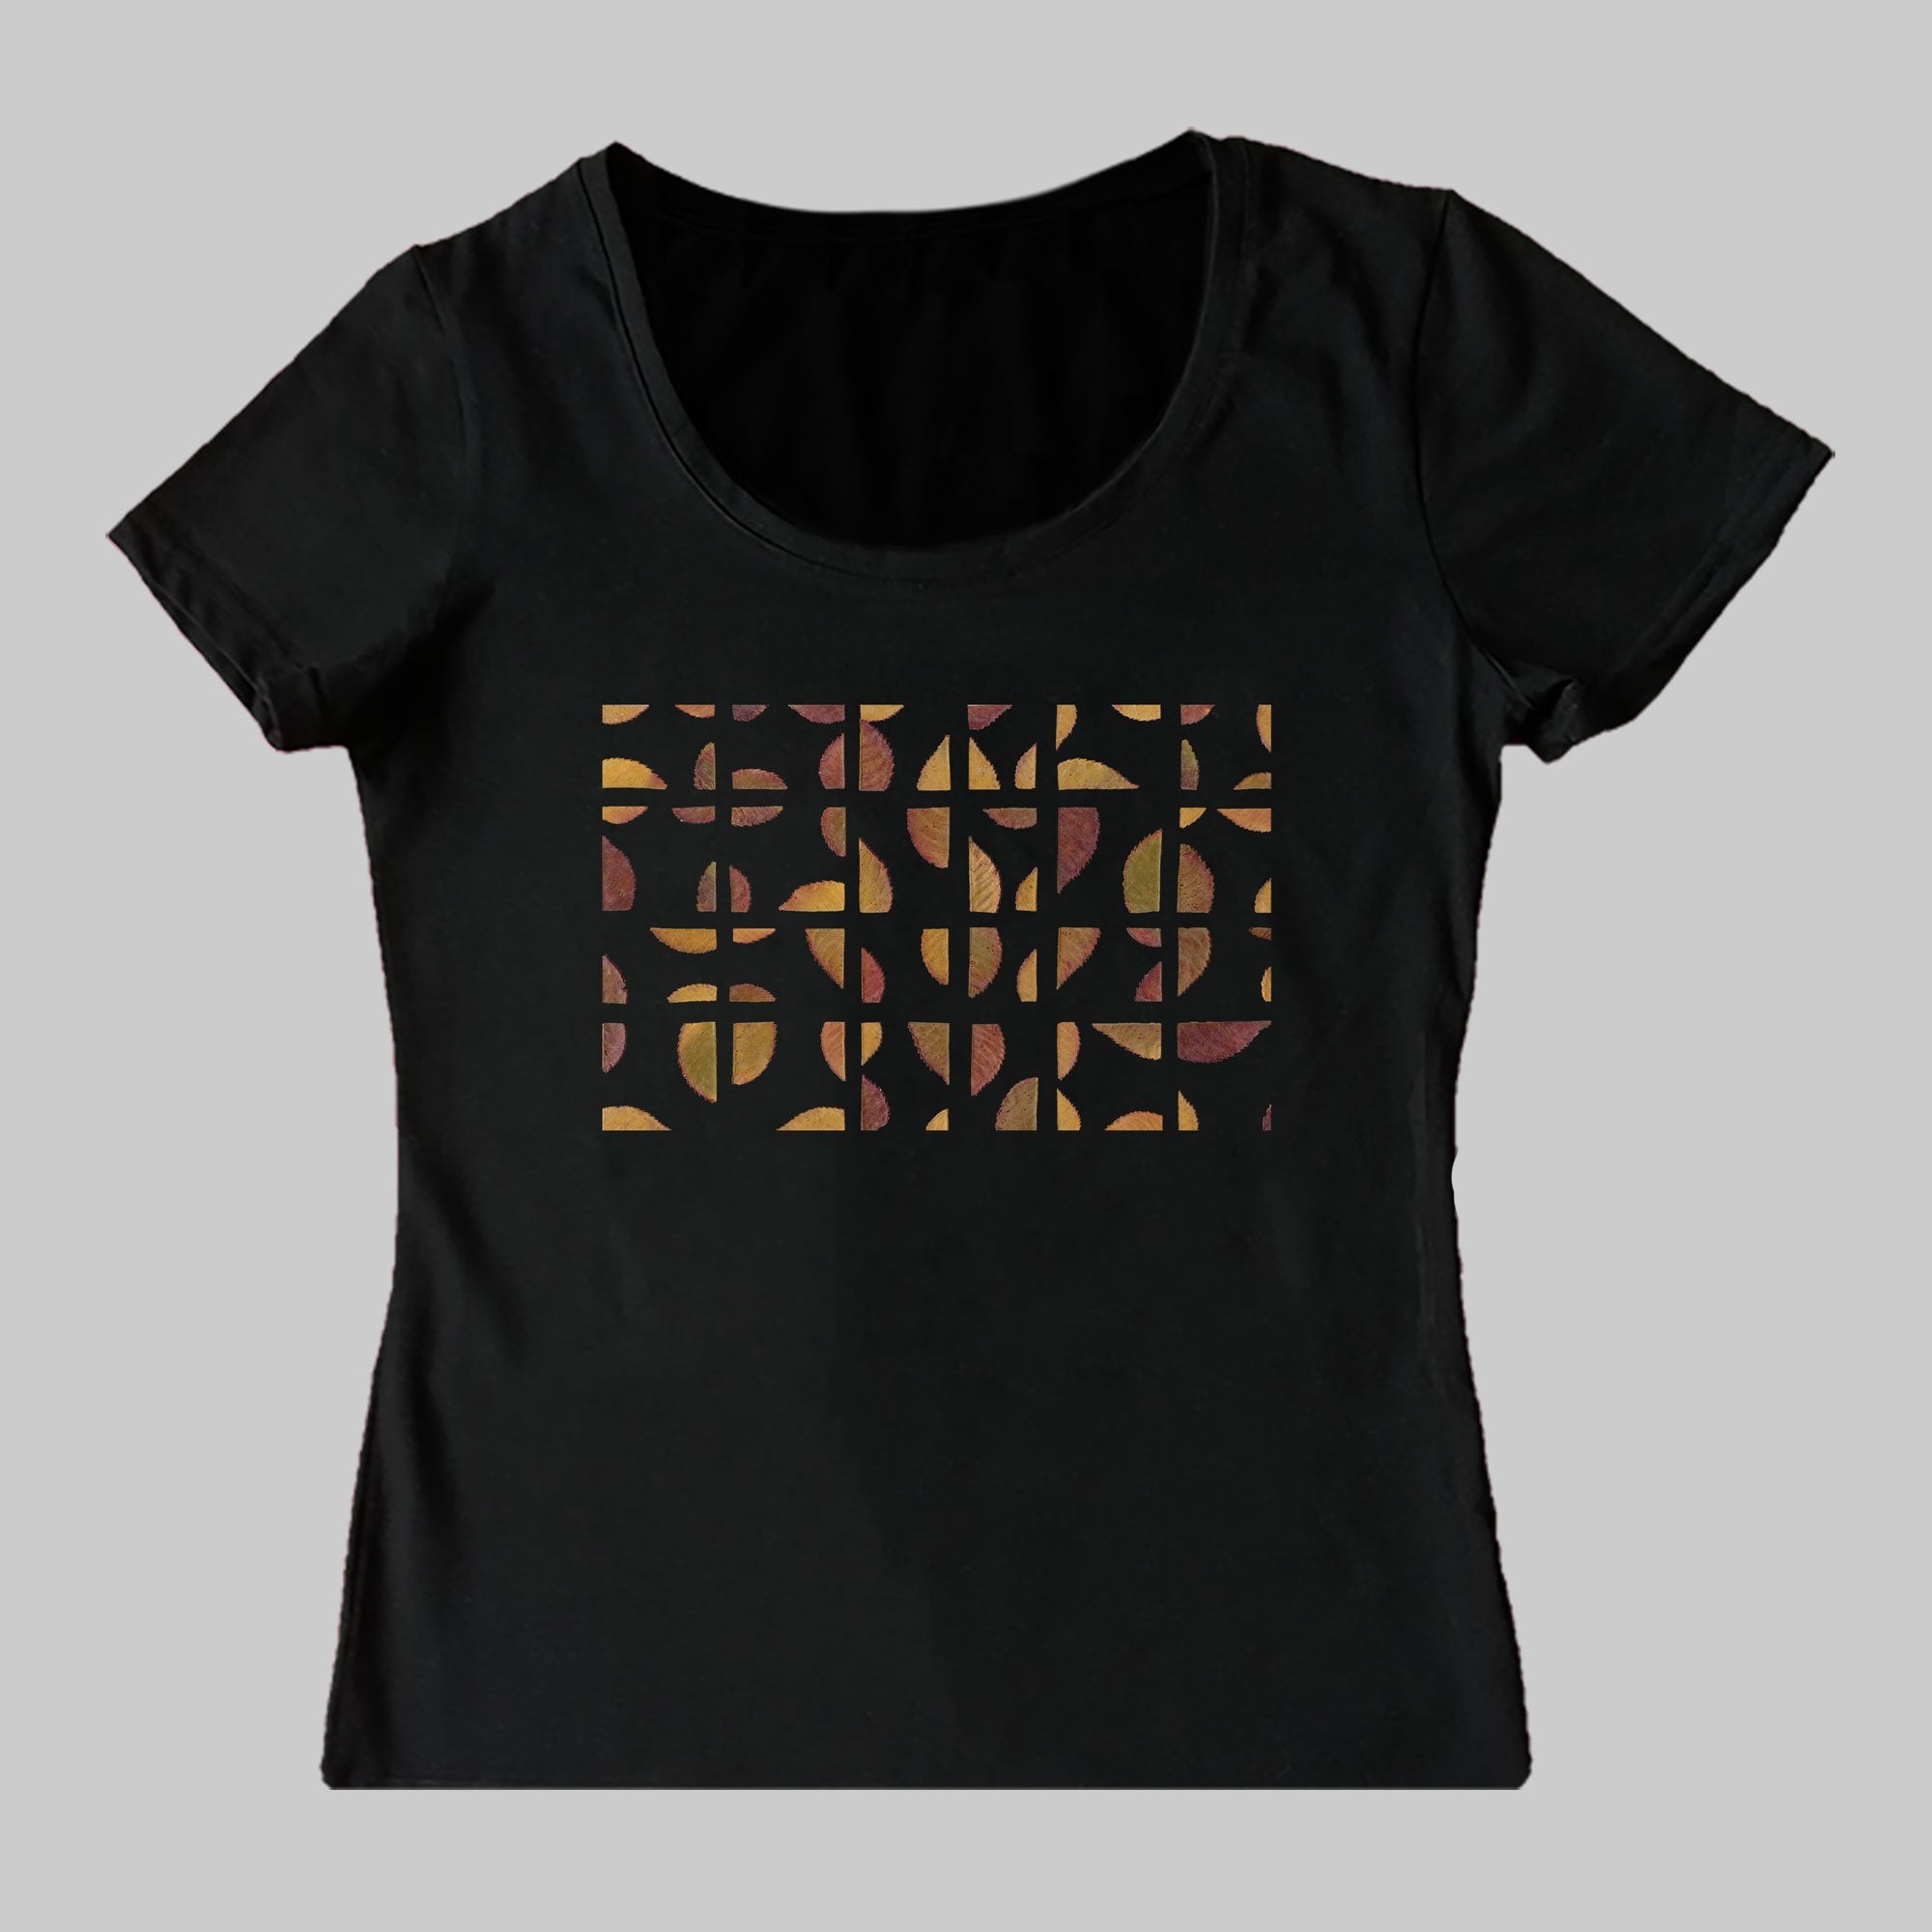 Abstract Leaves T-Shirt (Women's)